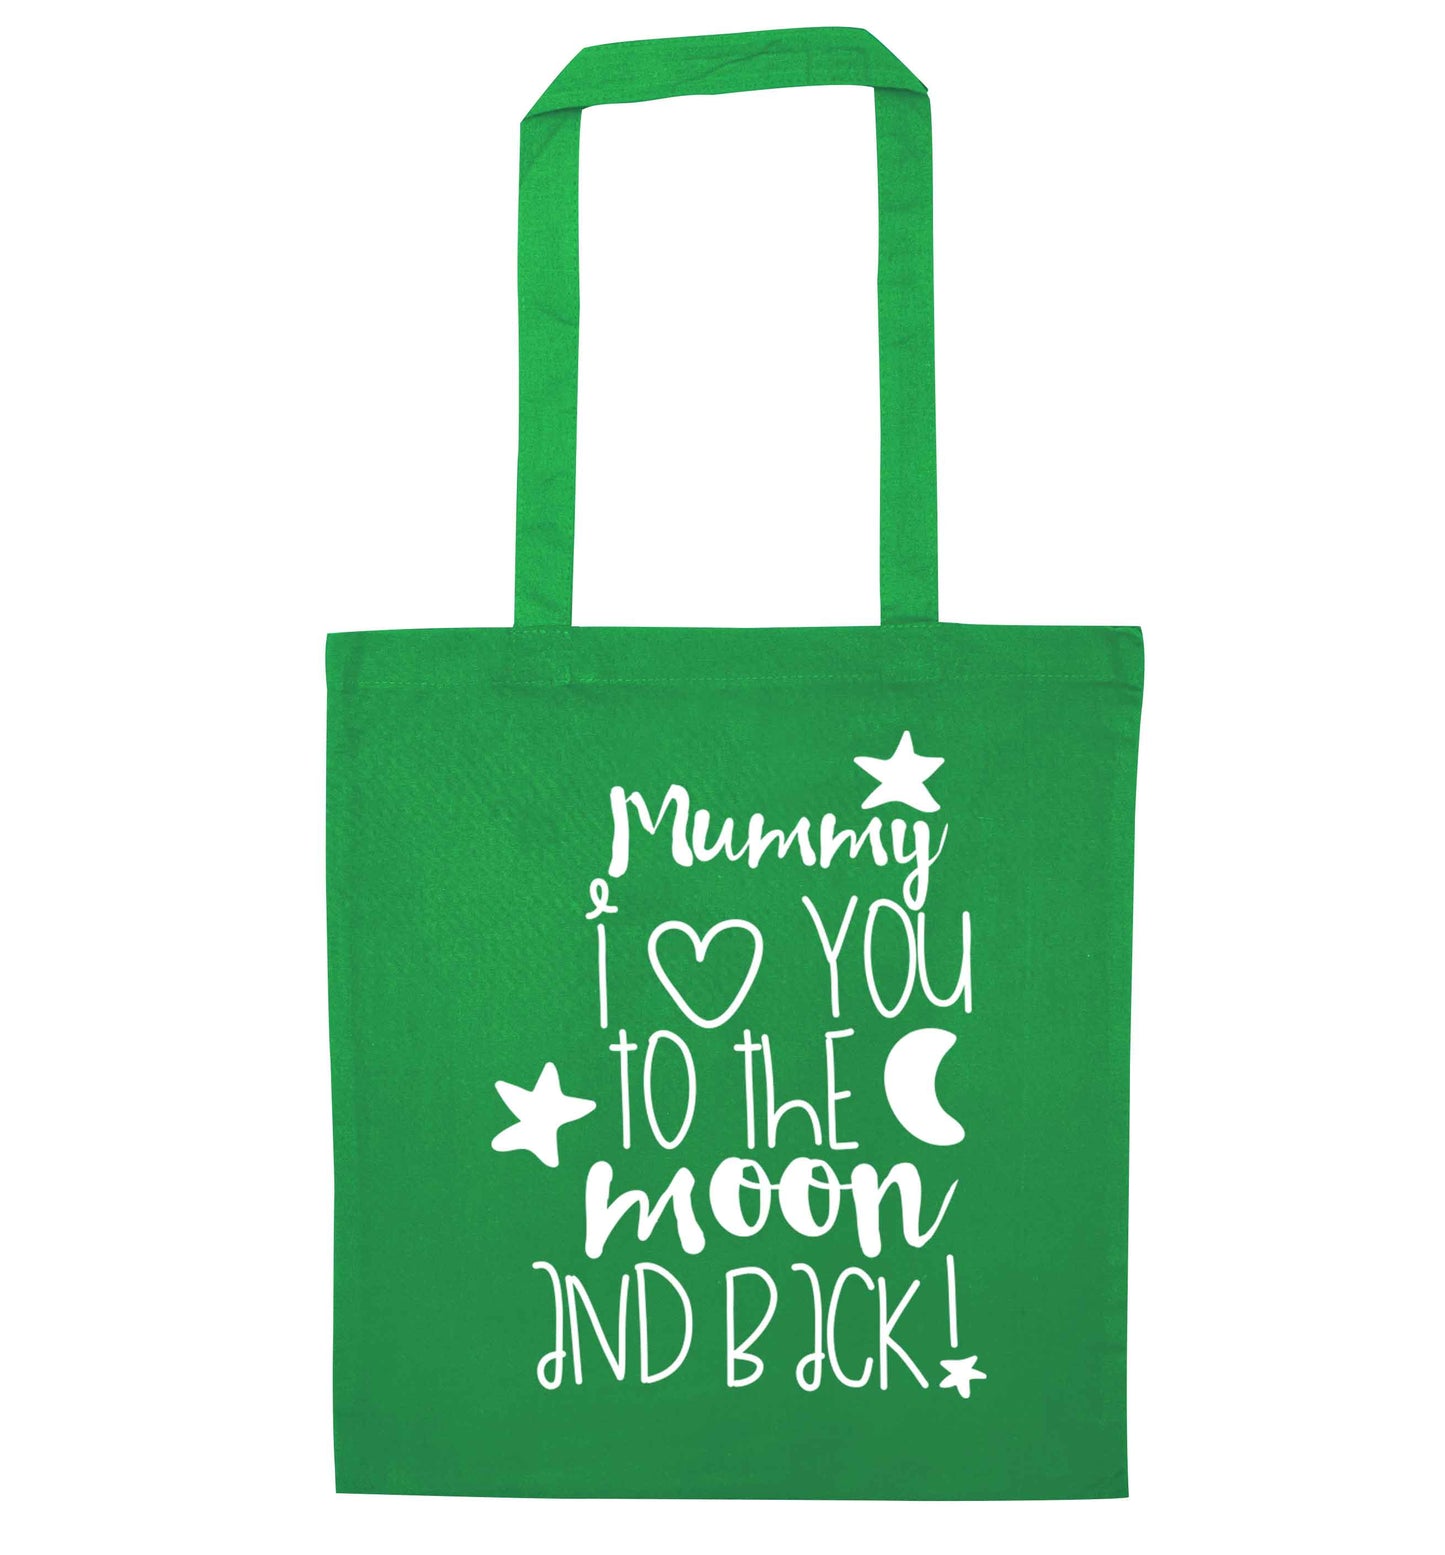 Mummy I love you to the moon and back green tote bag